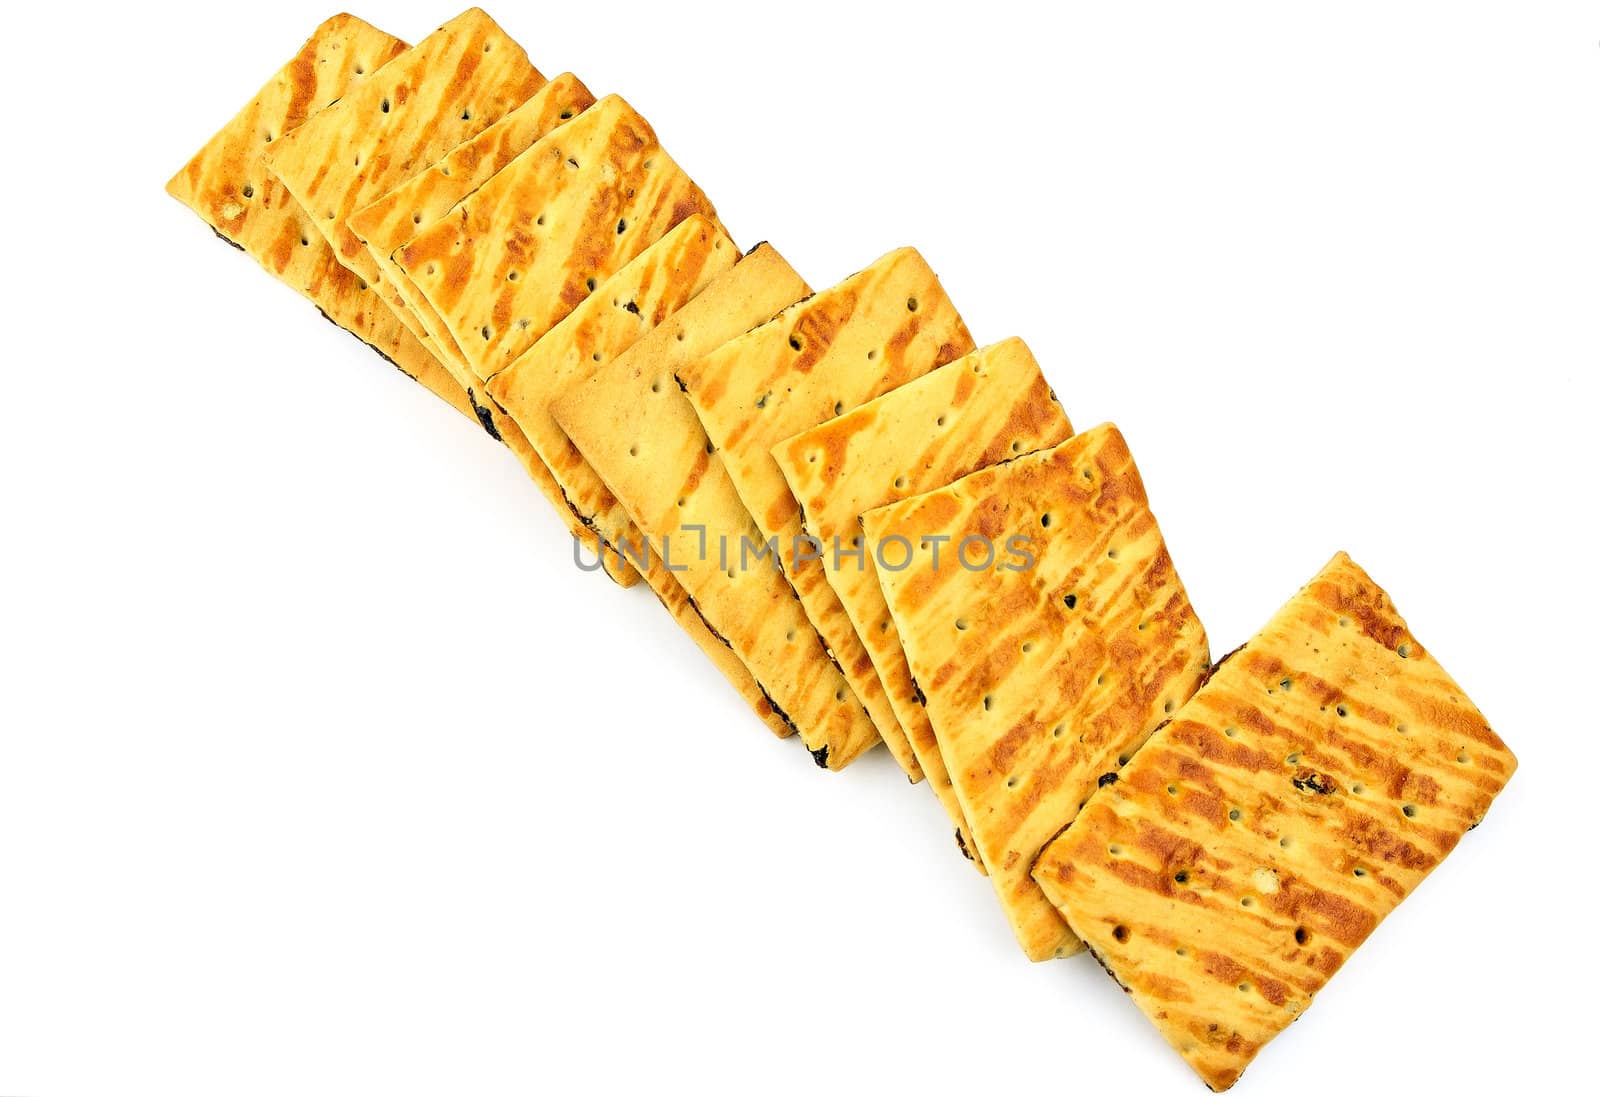 Pile of cookies with raisins, on white background